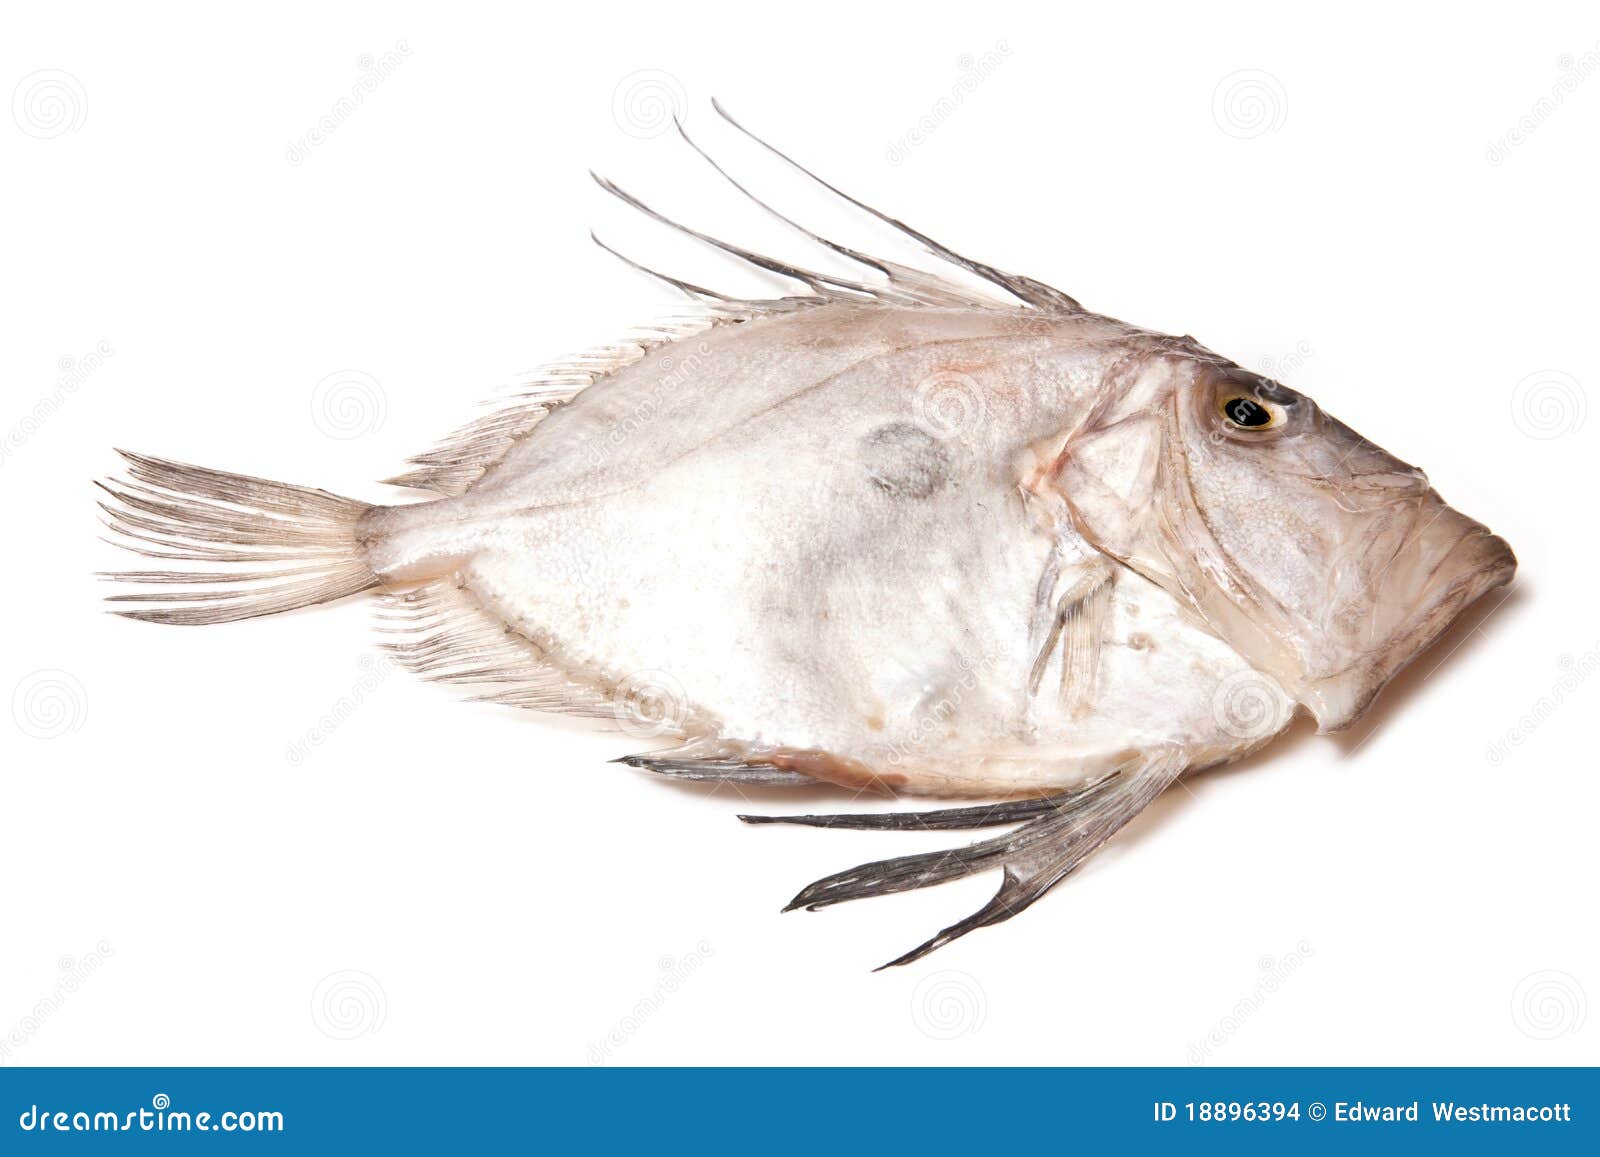 John Dory fish , also known as St Pierre or Kuparu.